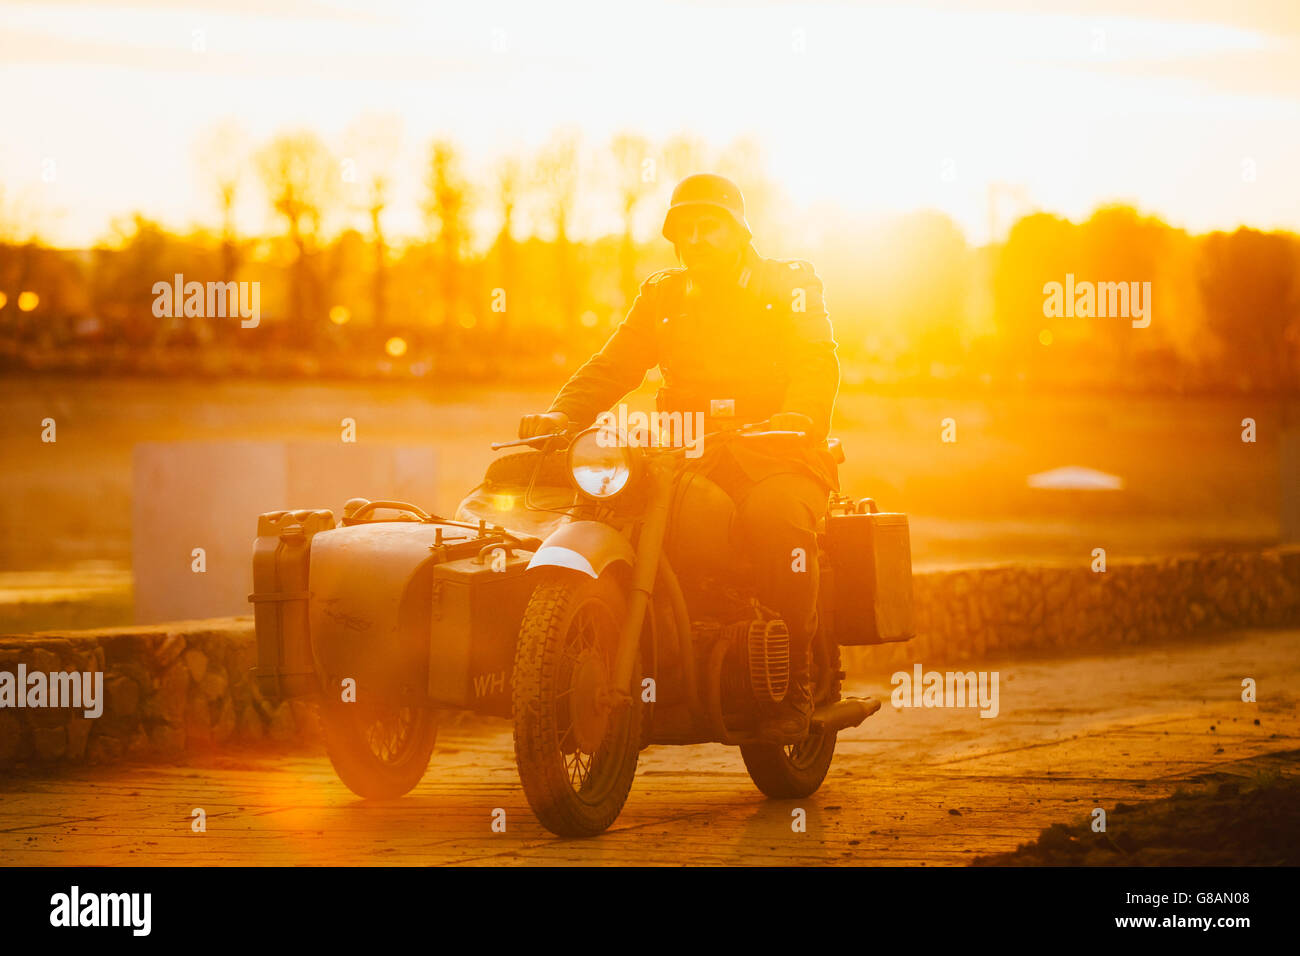 Unidentified re-enactor dressed as World War II german wehrmacht soldier rides on motorcycle in  rays of sunset sun. Stock Photo